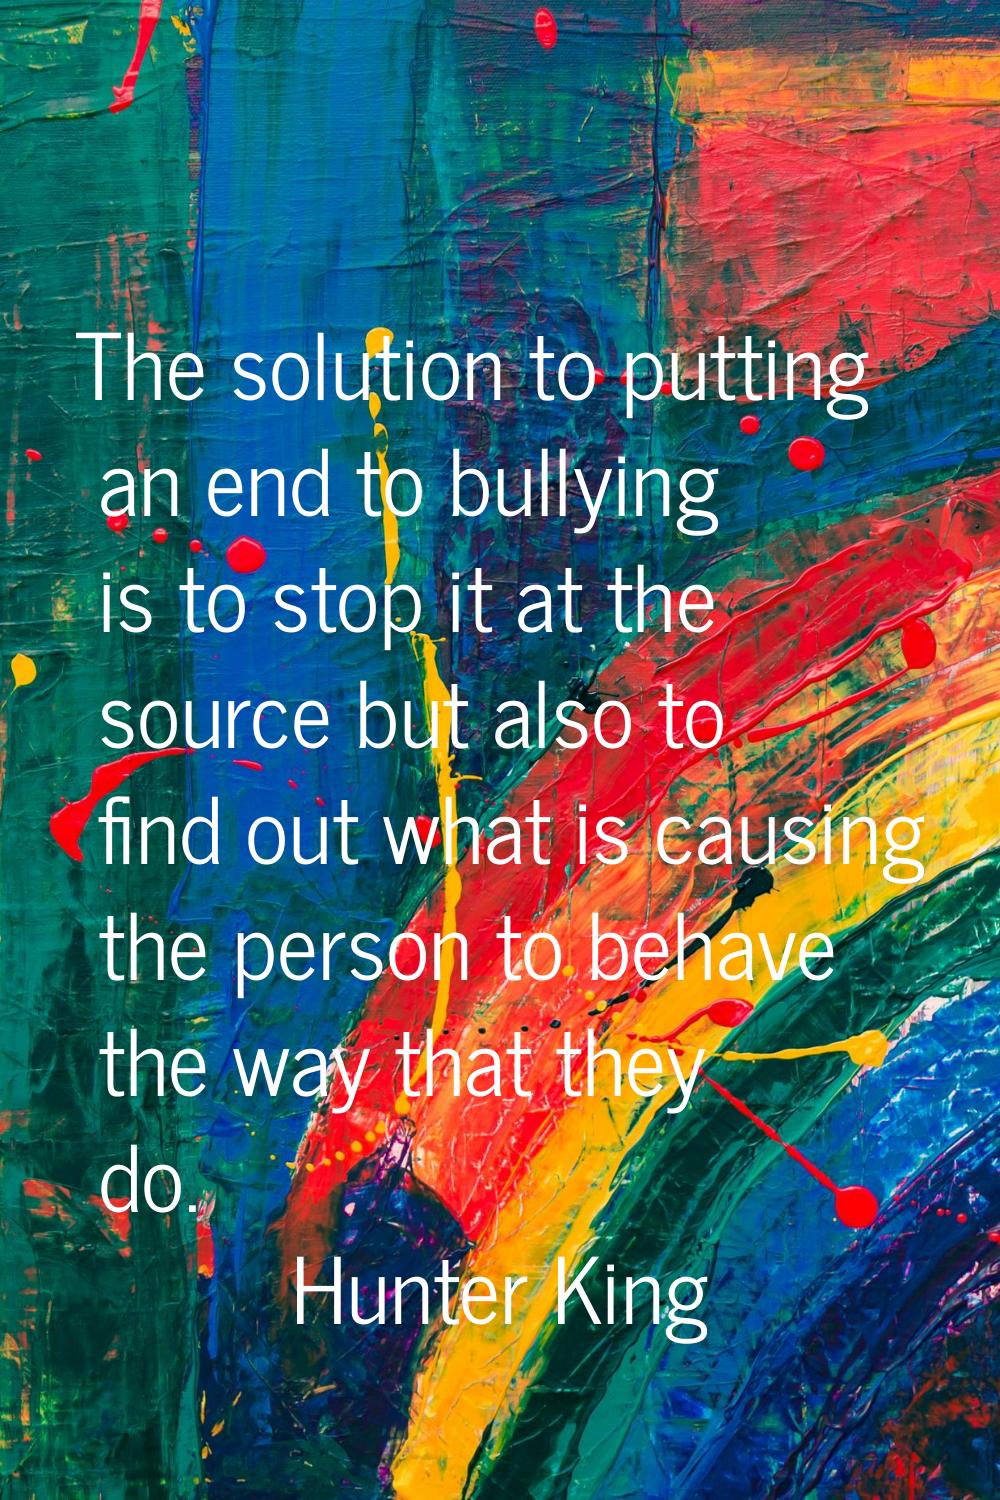 The solution to putting an end to bullying is to stop it at the source but also to find out what is